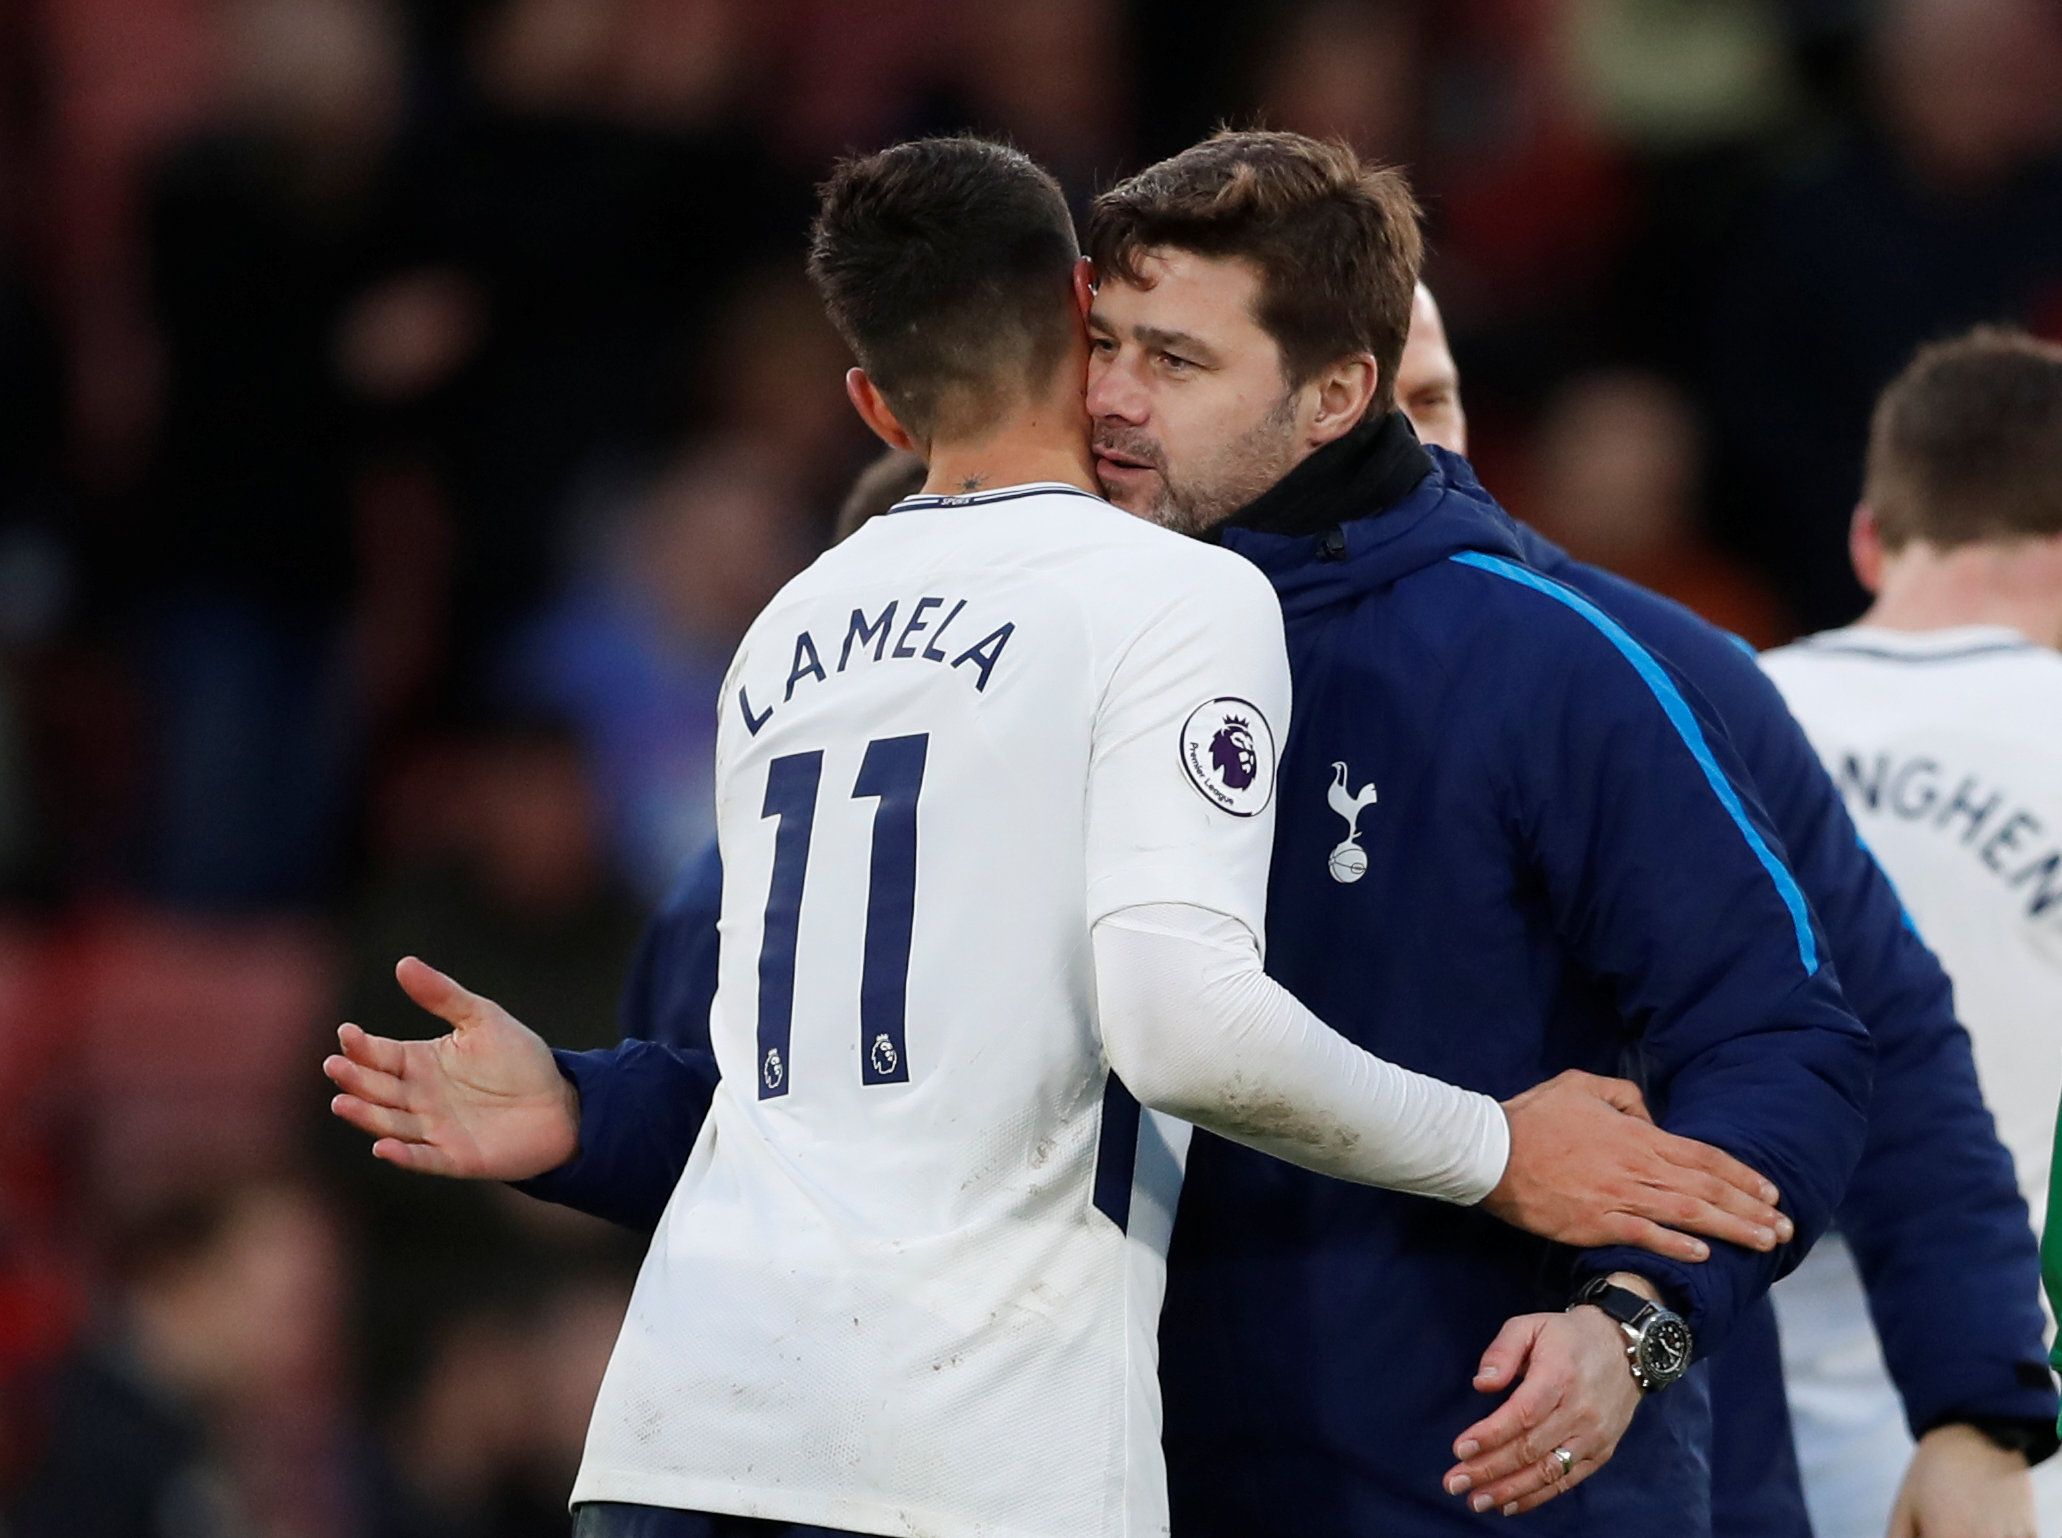 Soccer Football - Premier League - AFC Bournemouth vs Tottenham Hotspur - Vitality Stadium, Bournemouth, Britain - March 11, 2018   Tottenham manager Mauricio Pochettino celebrates after the match with Erik Lamela    Action Images via Reuters/Matthew Childs    EDITORIAL USE ONLY. No use with unauthorized audio, video, data, fixture lists, club/league logos or "live" services. Online in-match use limited to 75 images, no video emulation. No use in betting, games or single club/league/player publi